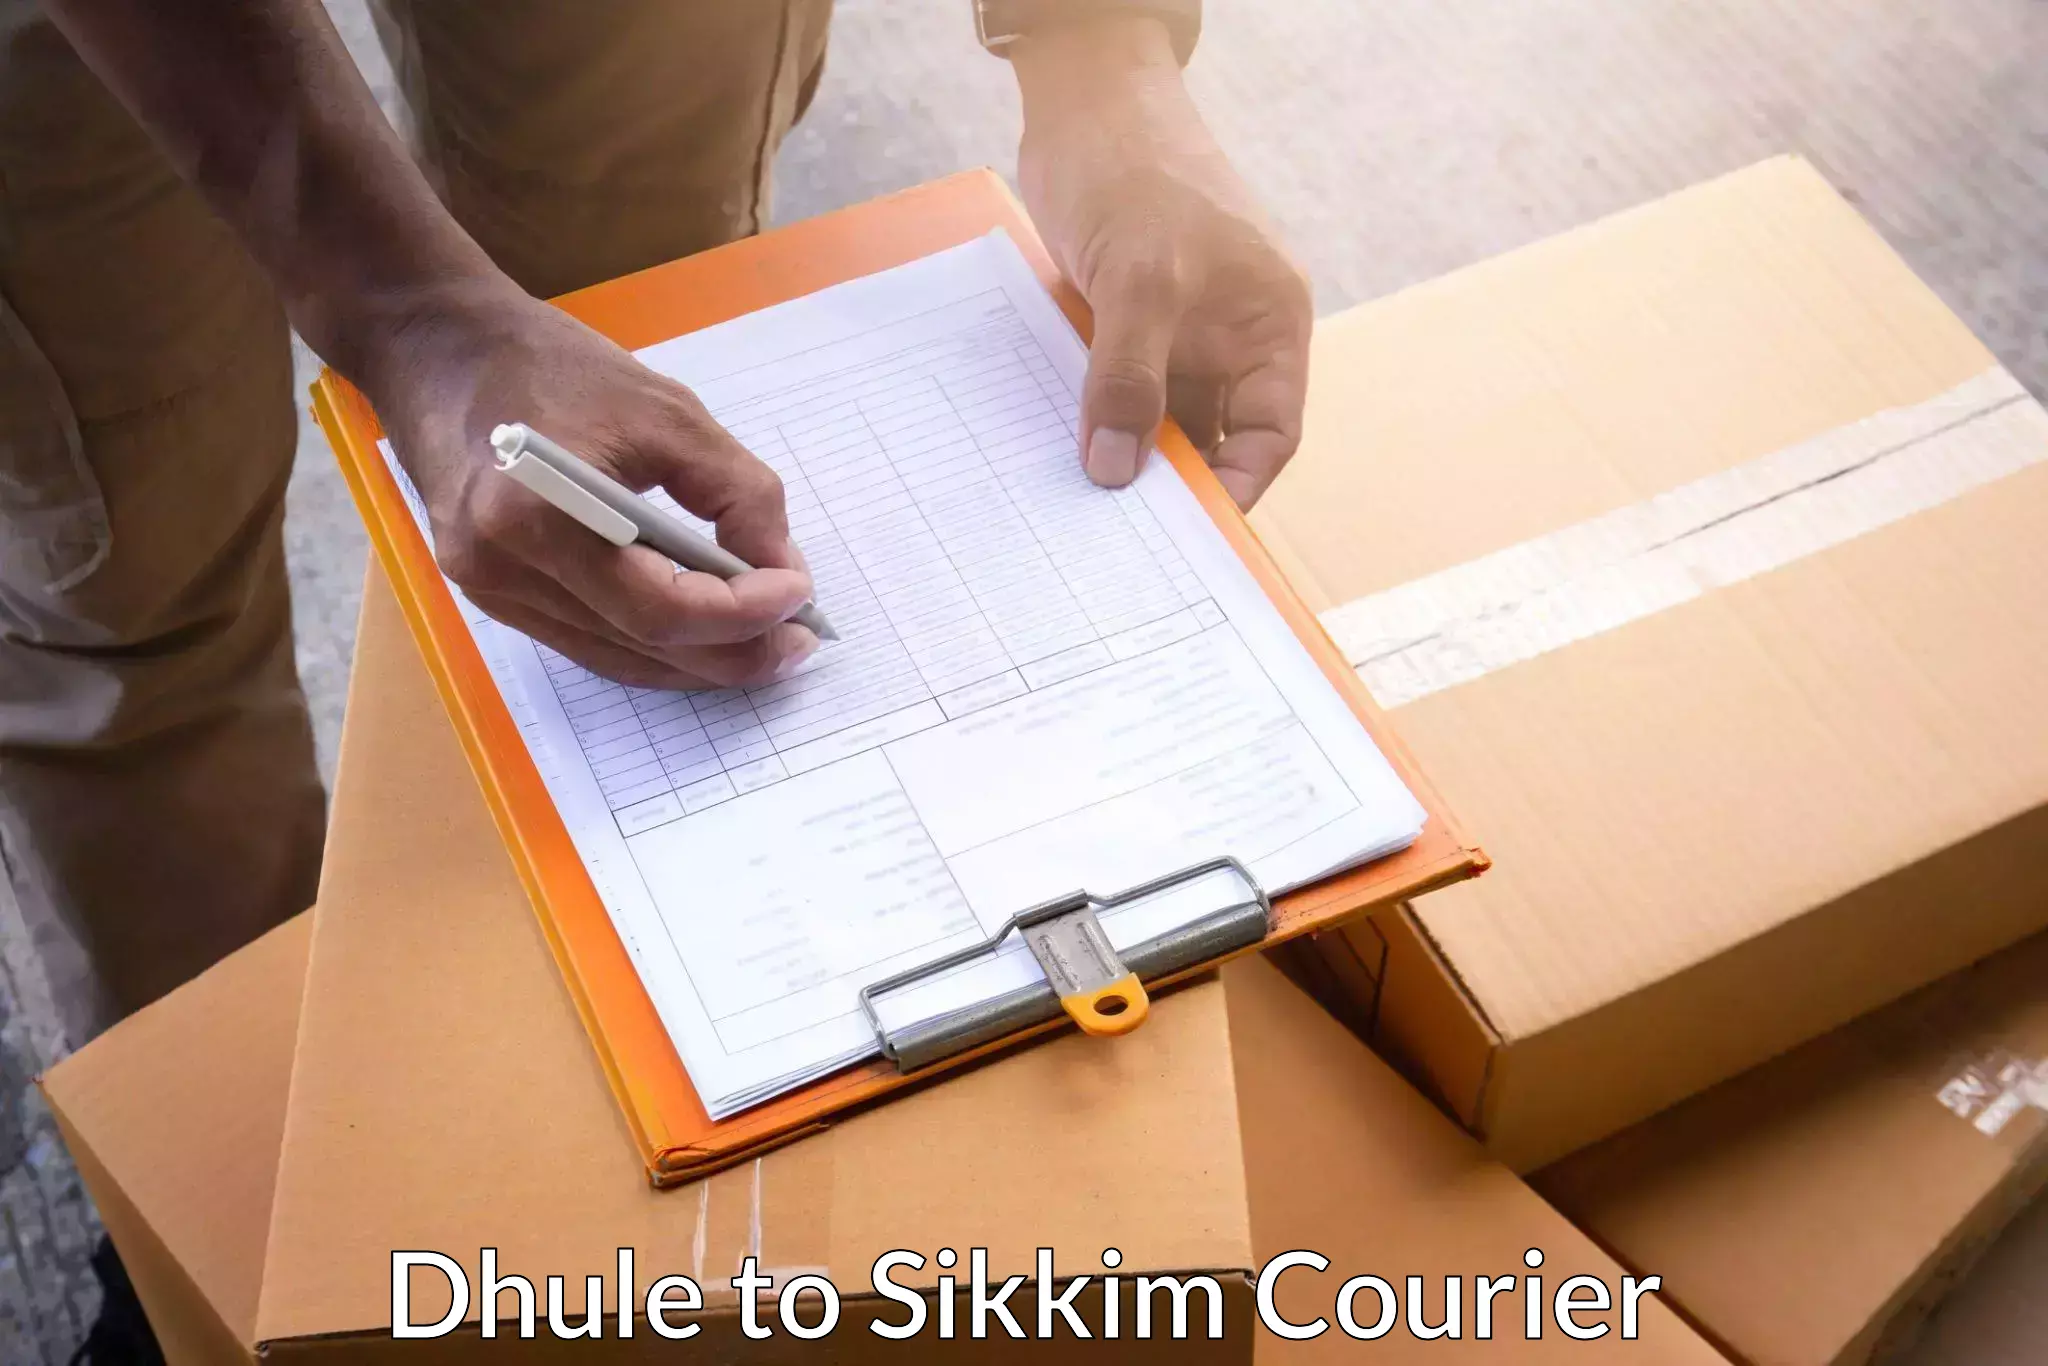 Speedy delivery service Dhule to South Sikkim